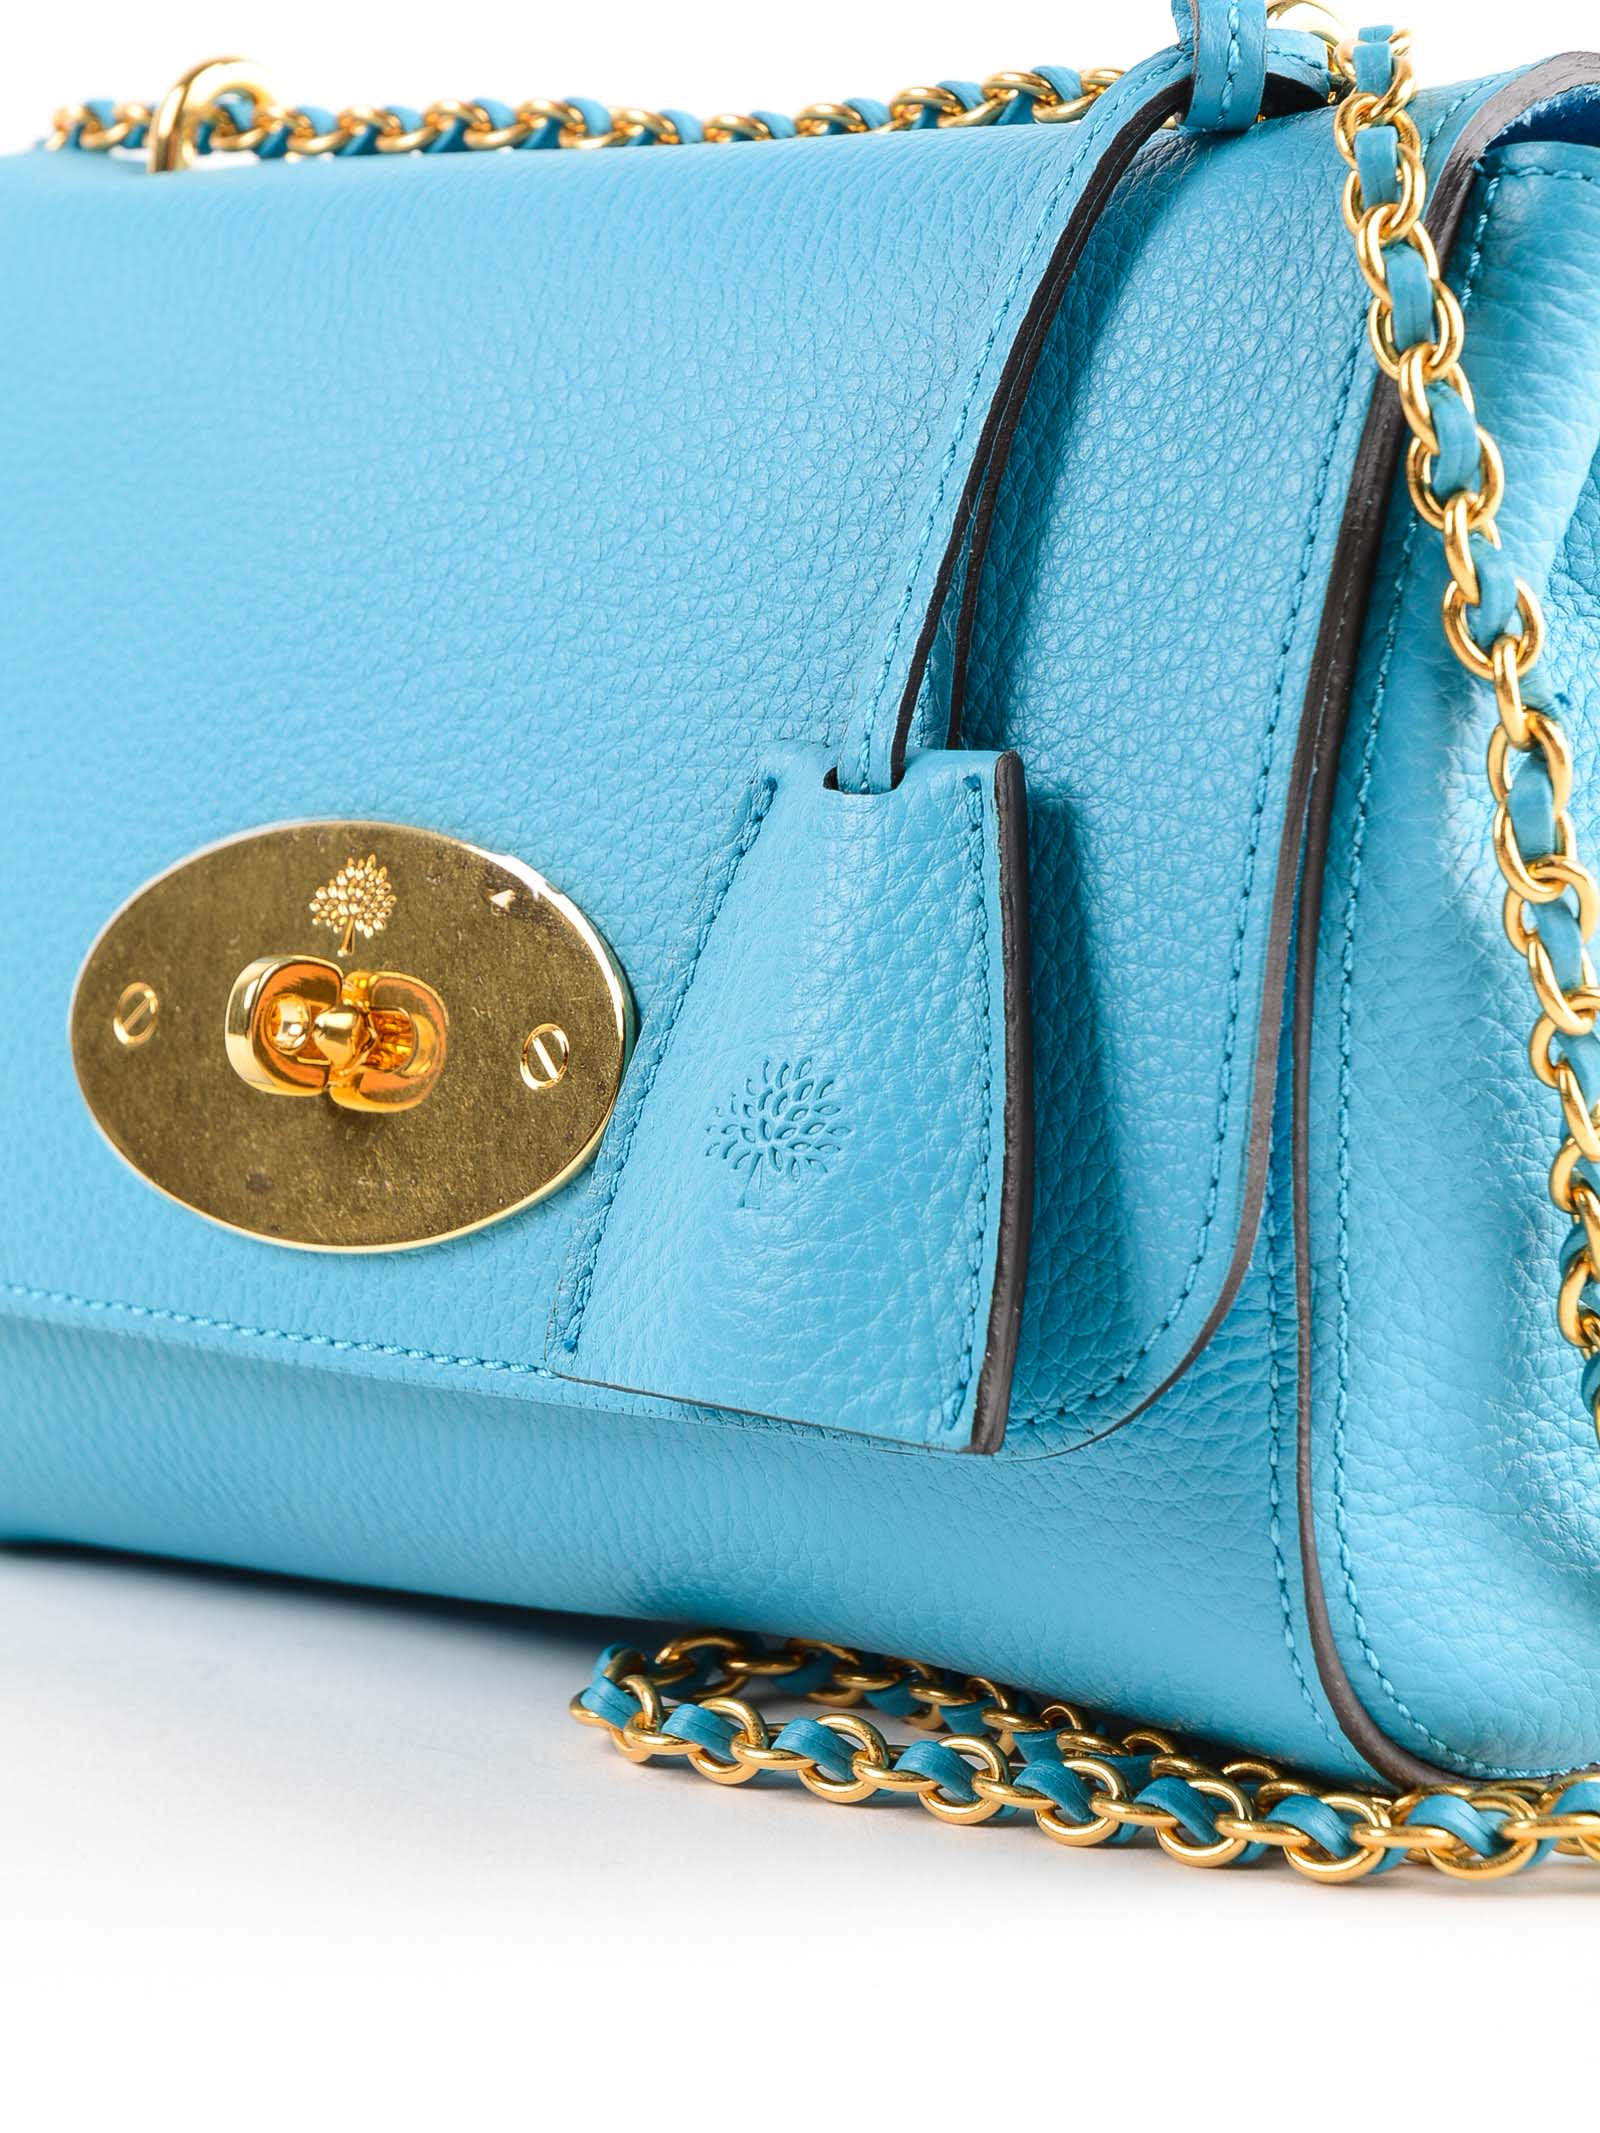 Mulberry Mulberry Small Lily Shoulder Bag - Azure - 10767133 | italist